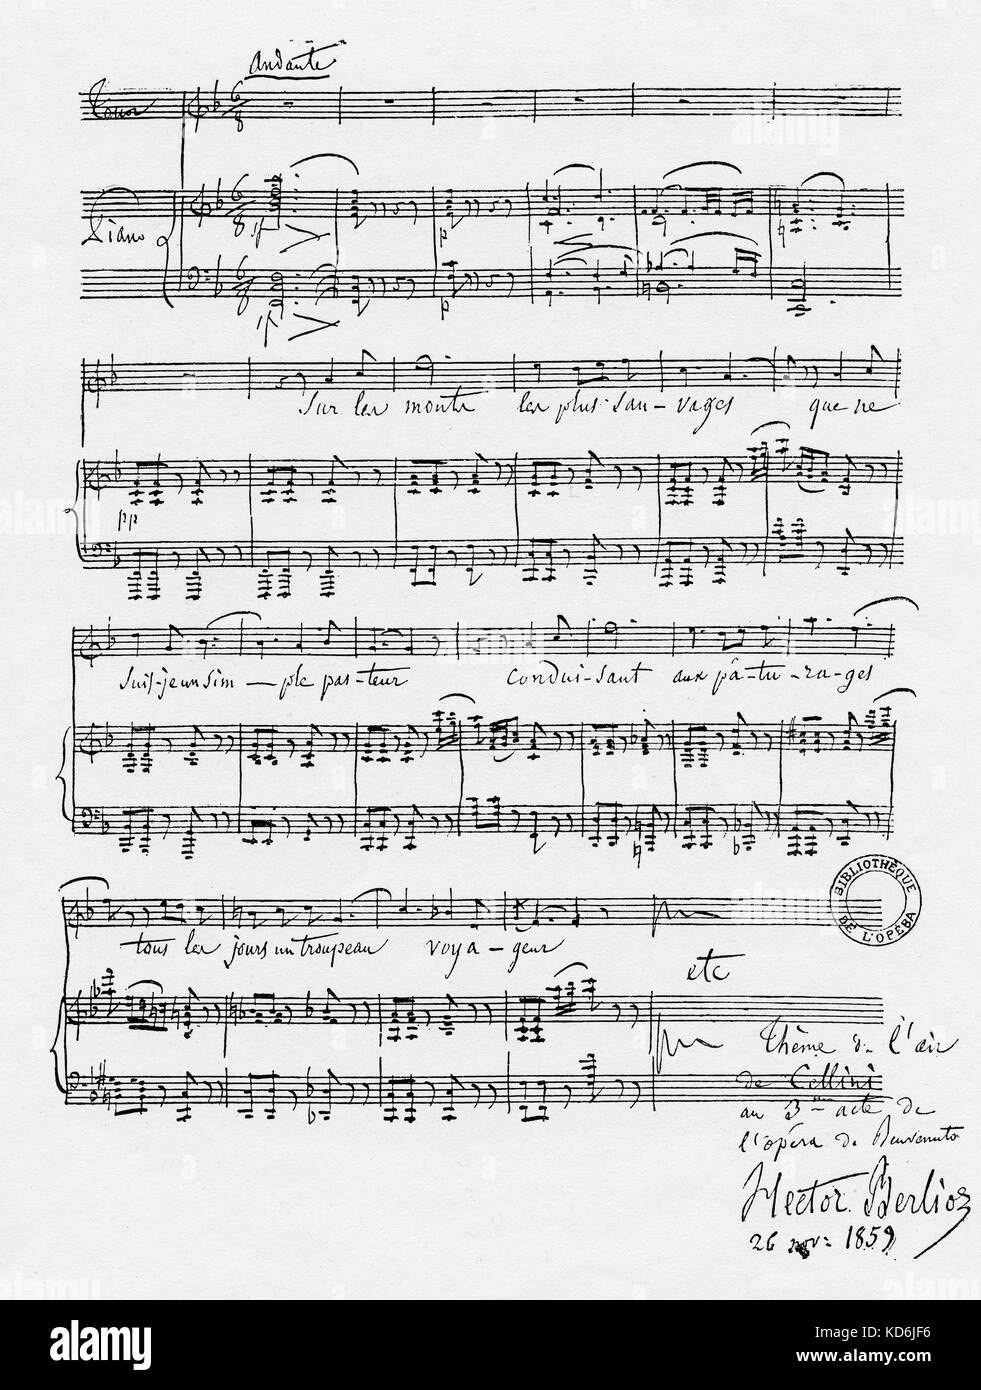 Hector Berlioz signed score of the theme from his opera Benvenuto Cellini', Act III.  26th November, 1859. French composer, 1803-1869. Stock Photo